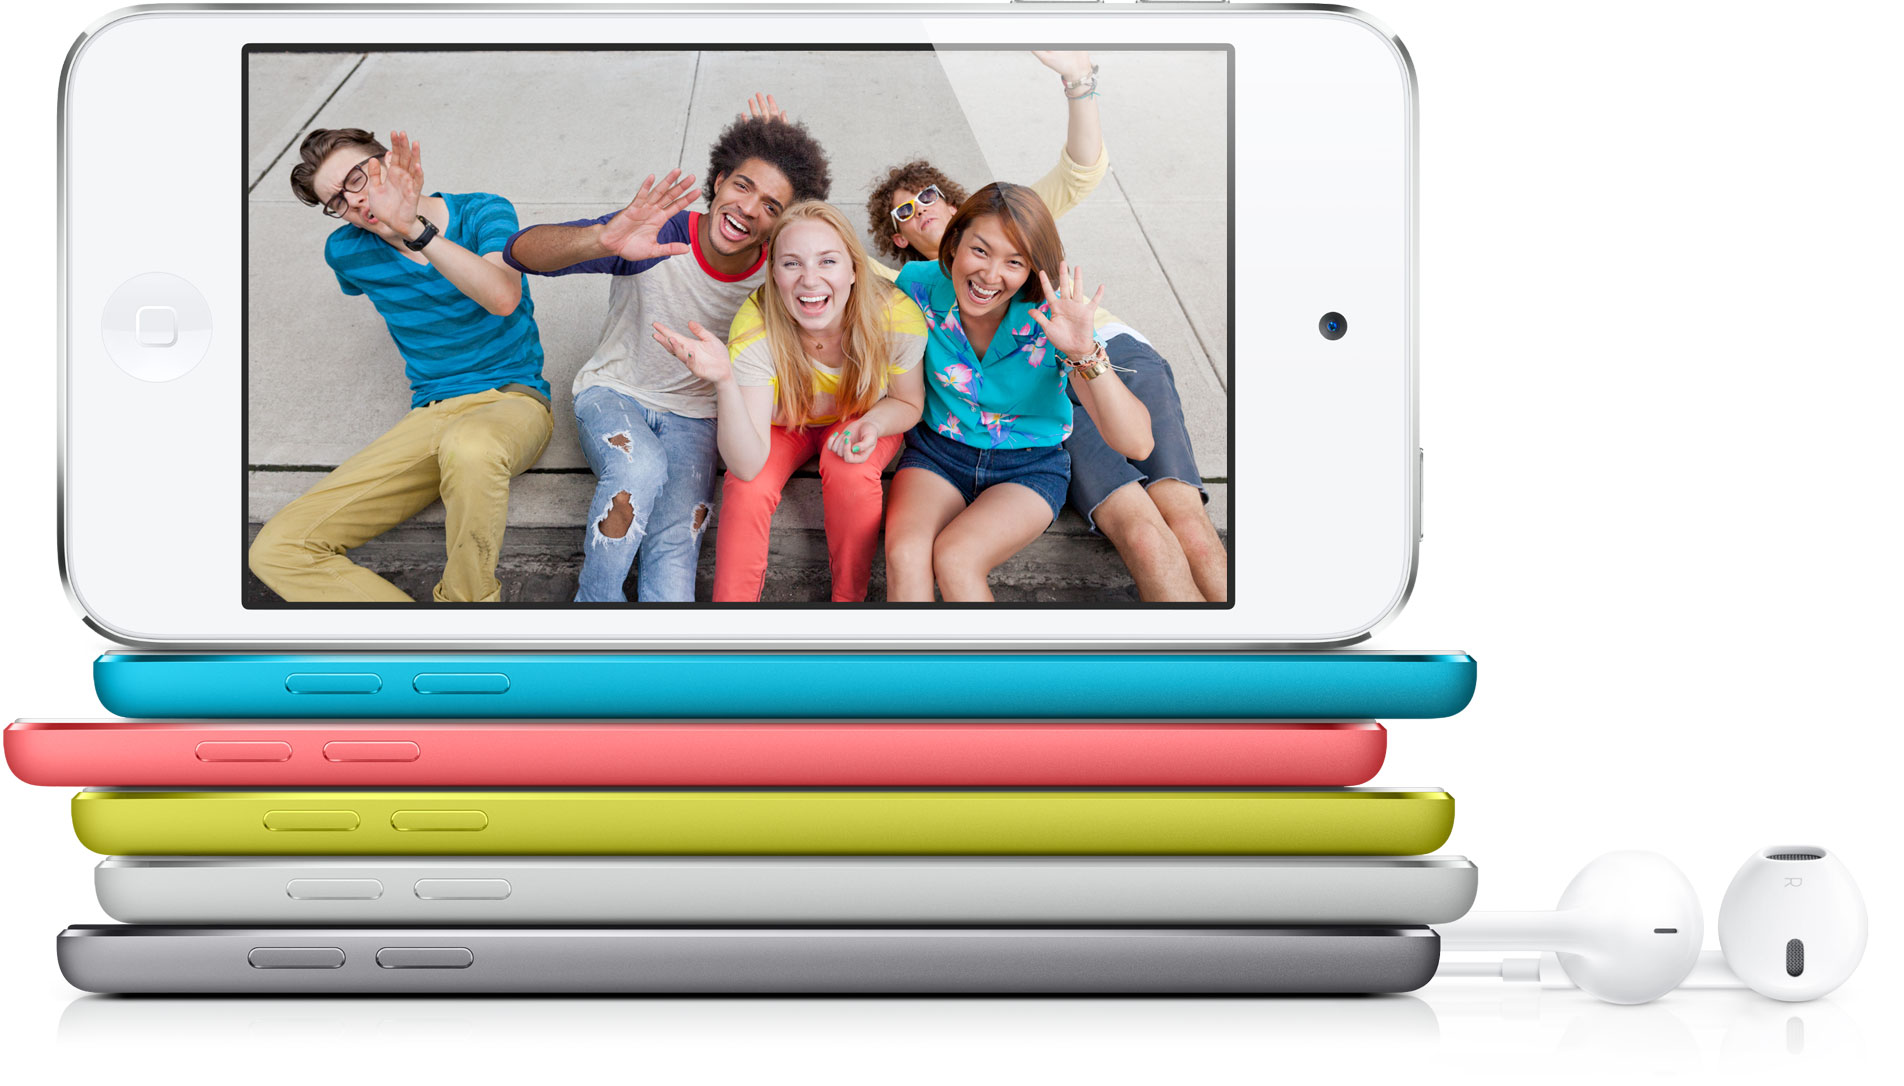 Record suggests new iPod touch with a focus on games coming up